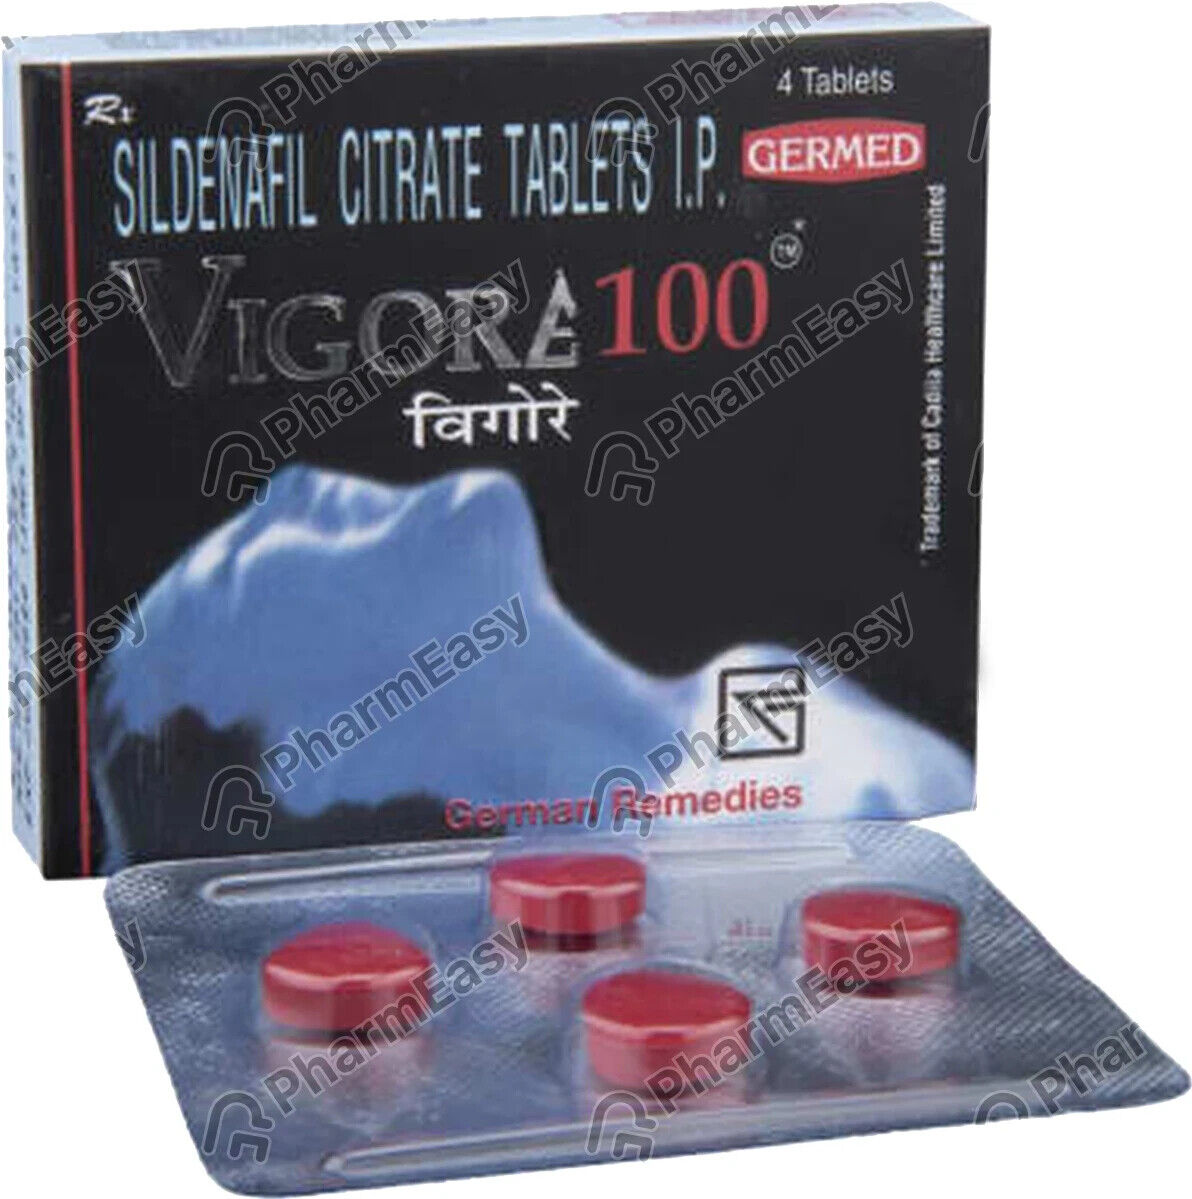 Vigore 100mg Strip Of 4 Tablets  Pack of 1